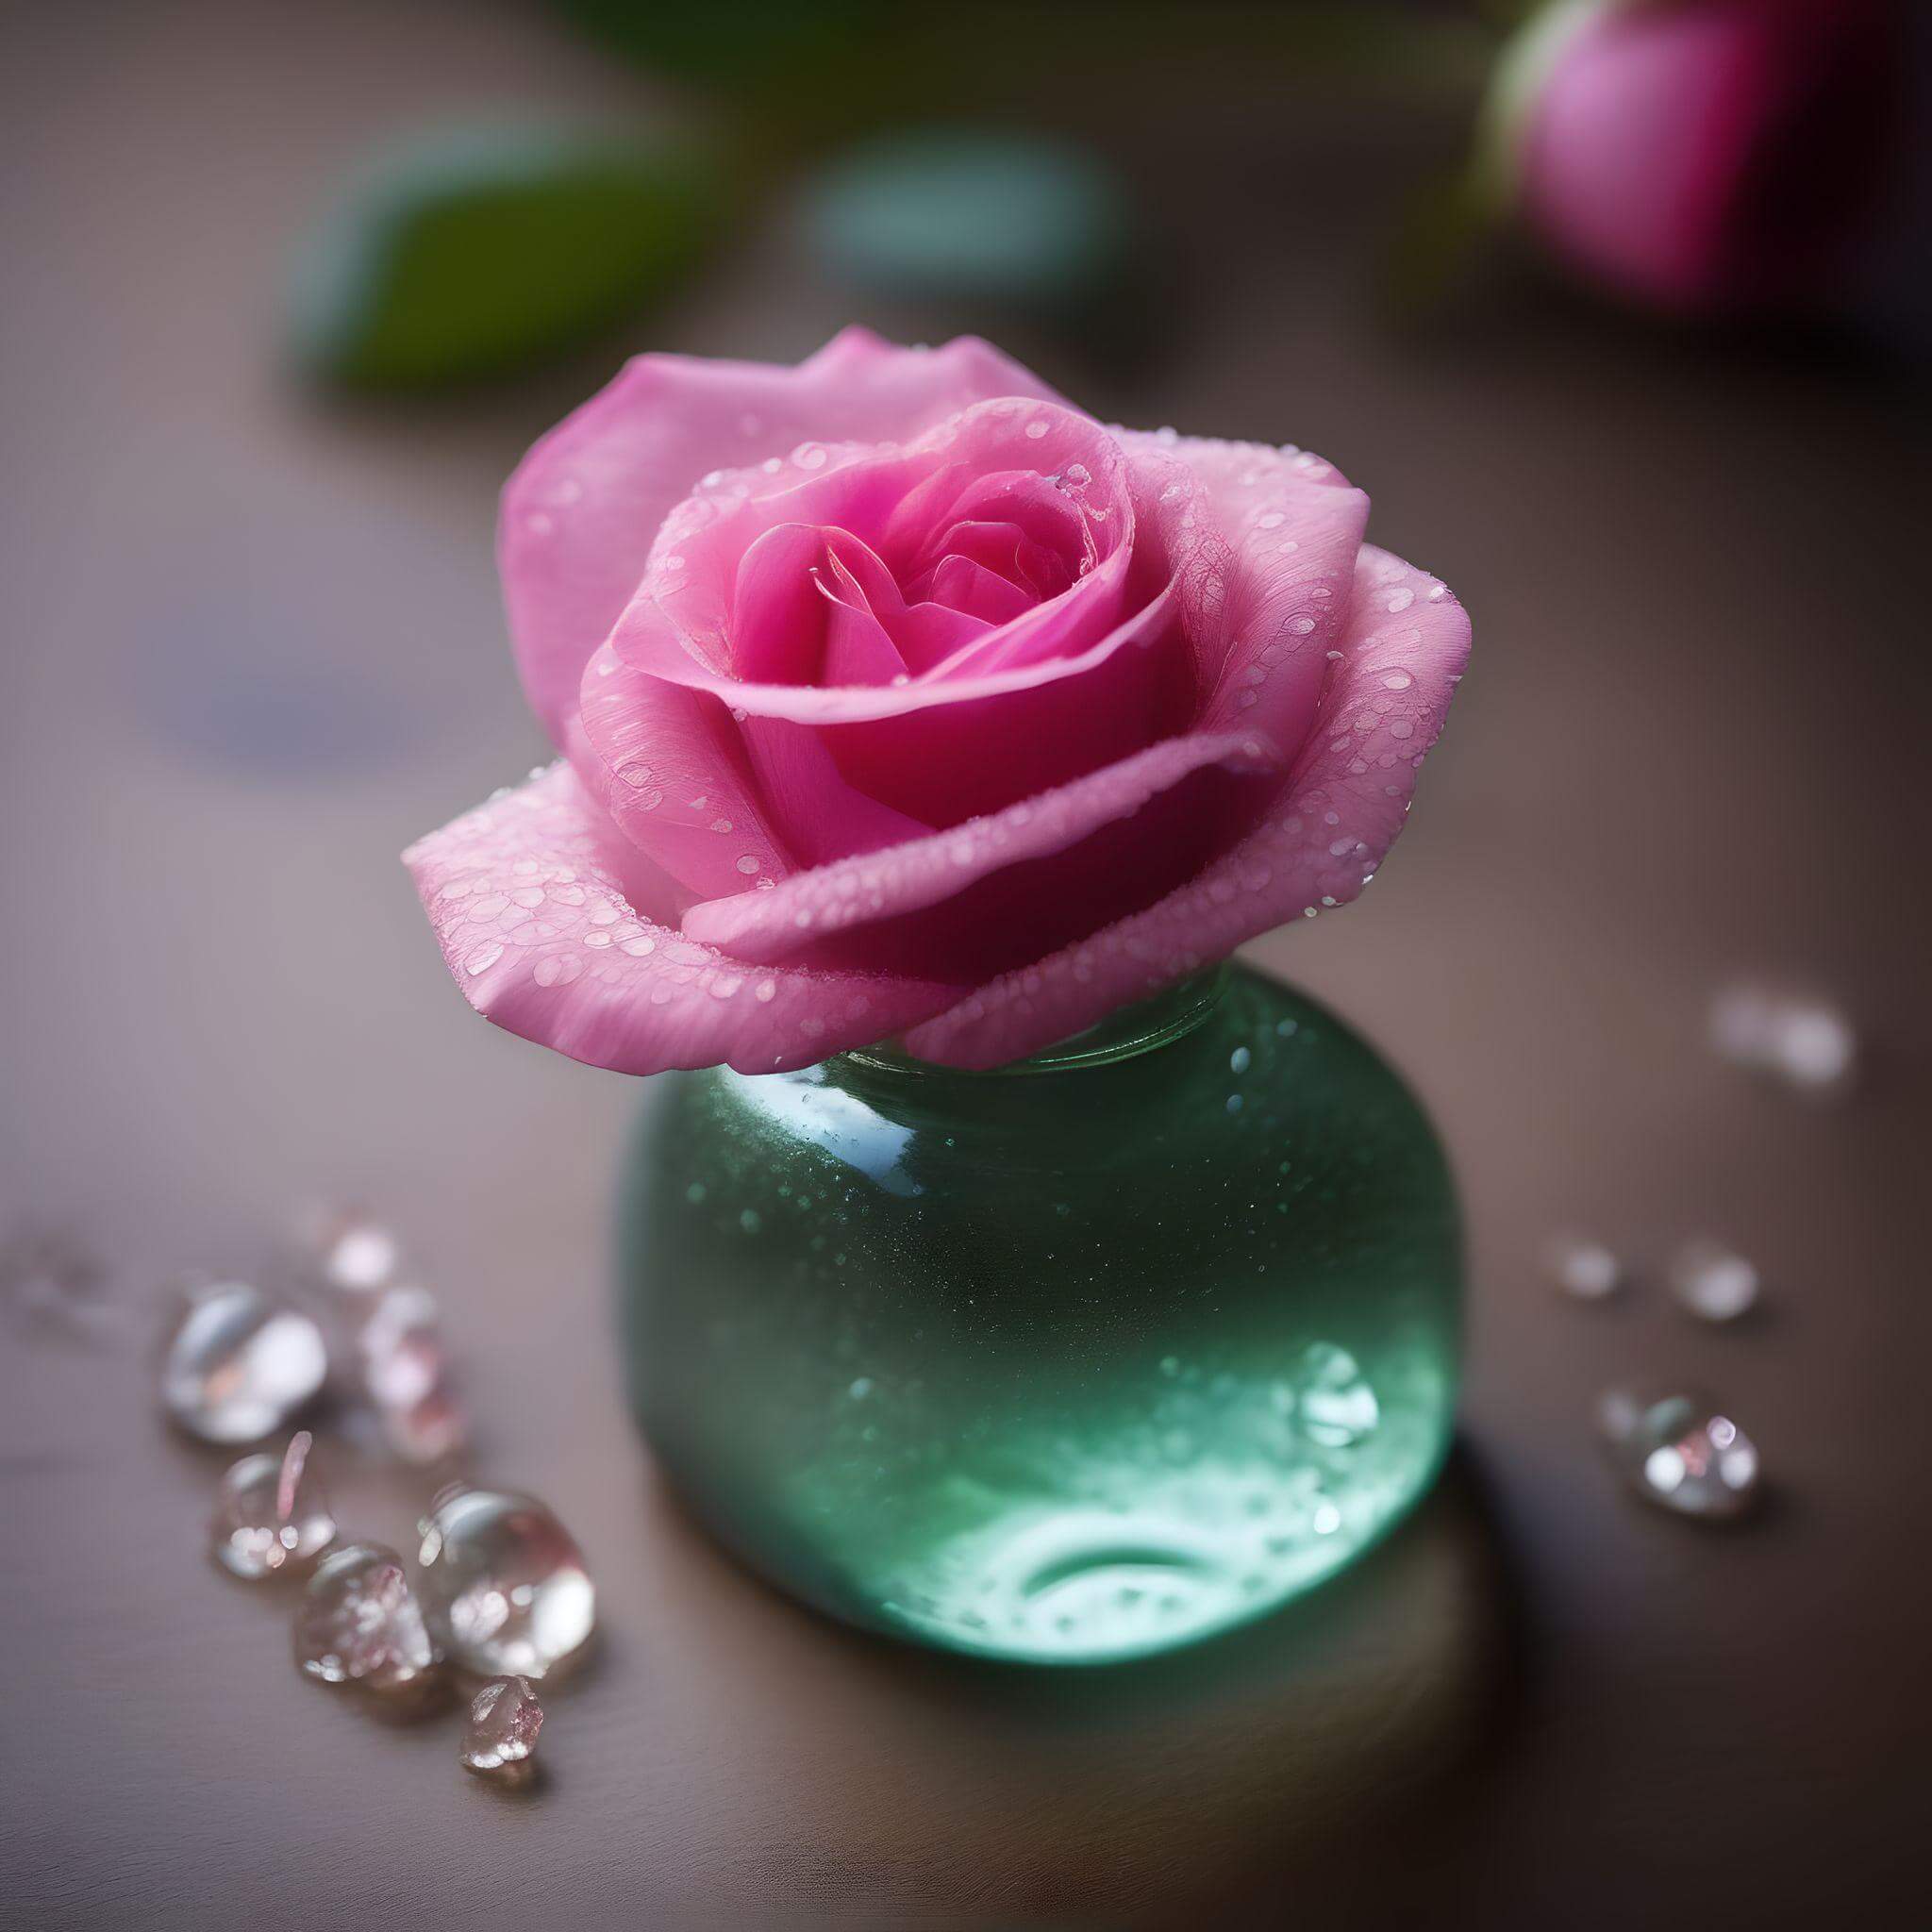 a pink rose in a glass bottle, dew on the petals